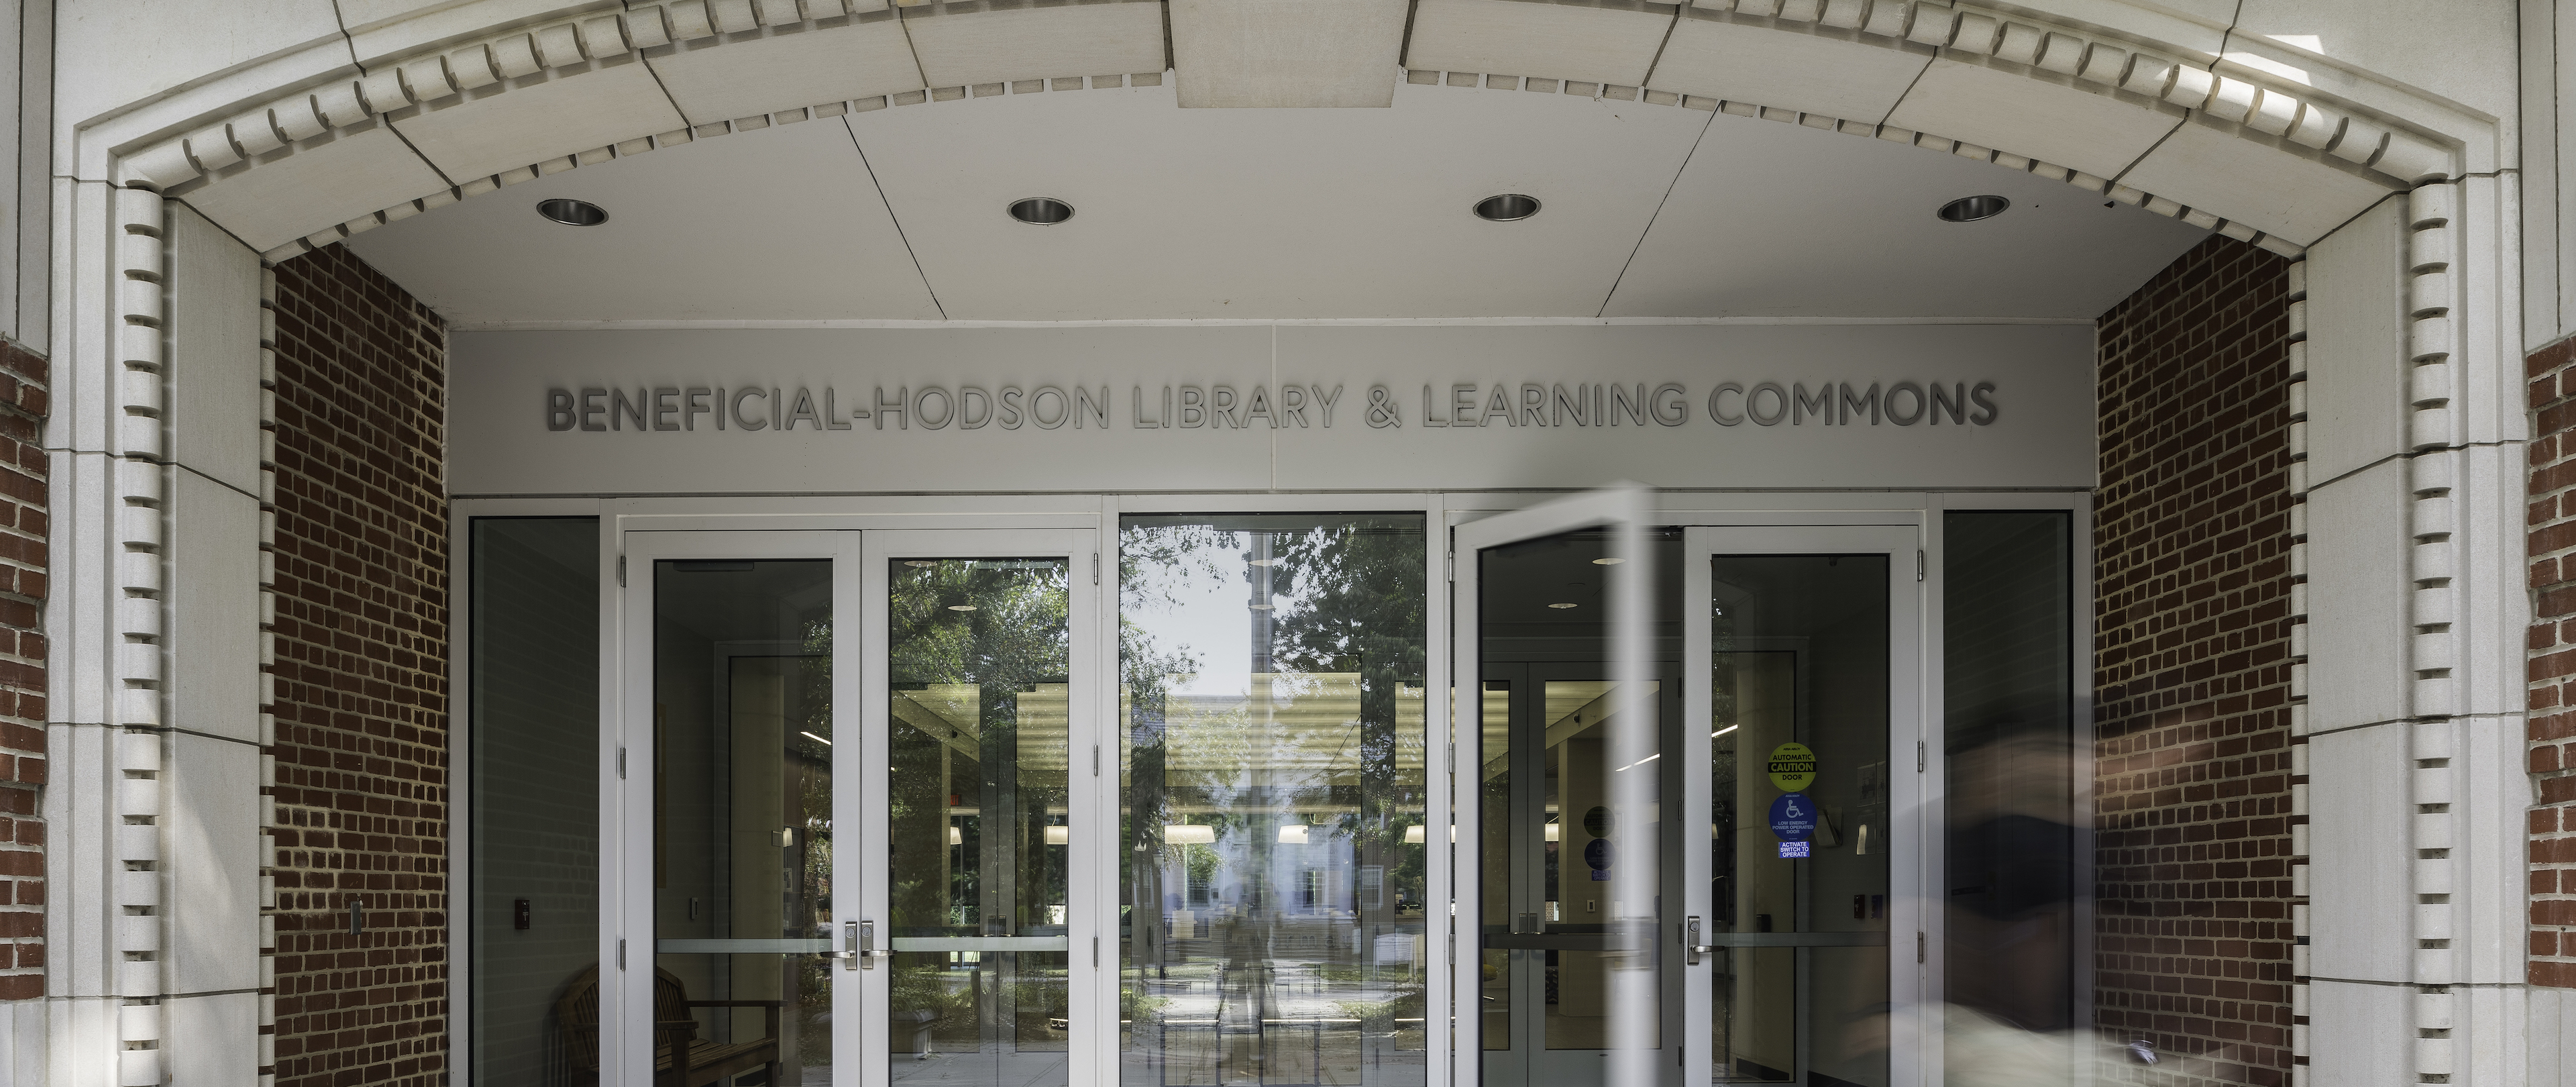 The entrance to the Beneficial-Hodson Library and Learning Commons